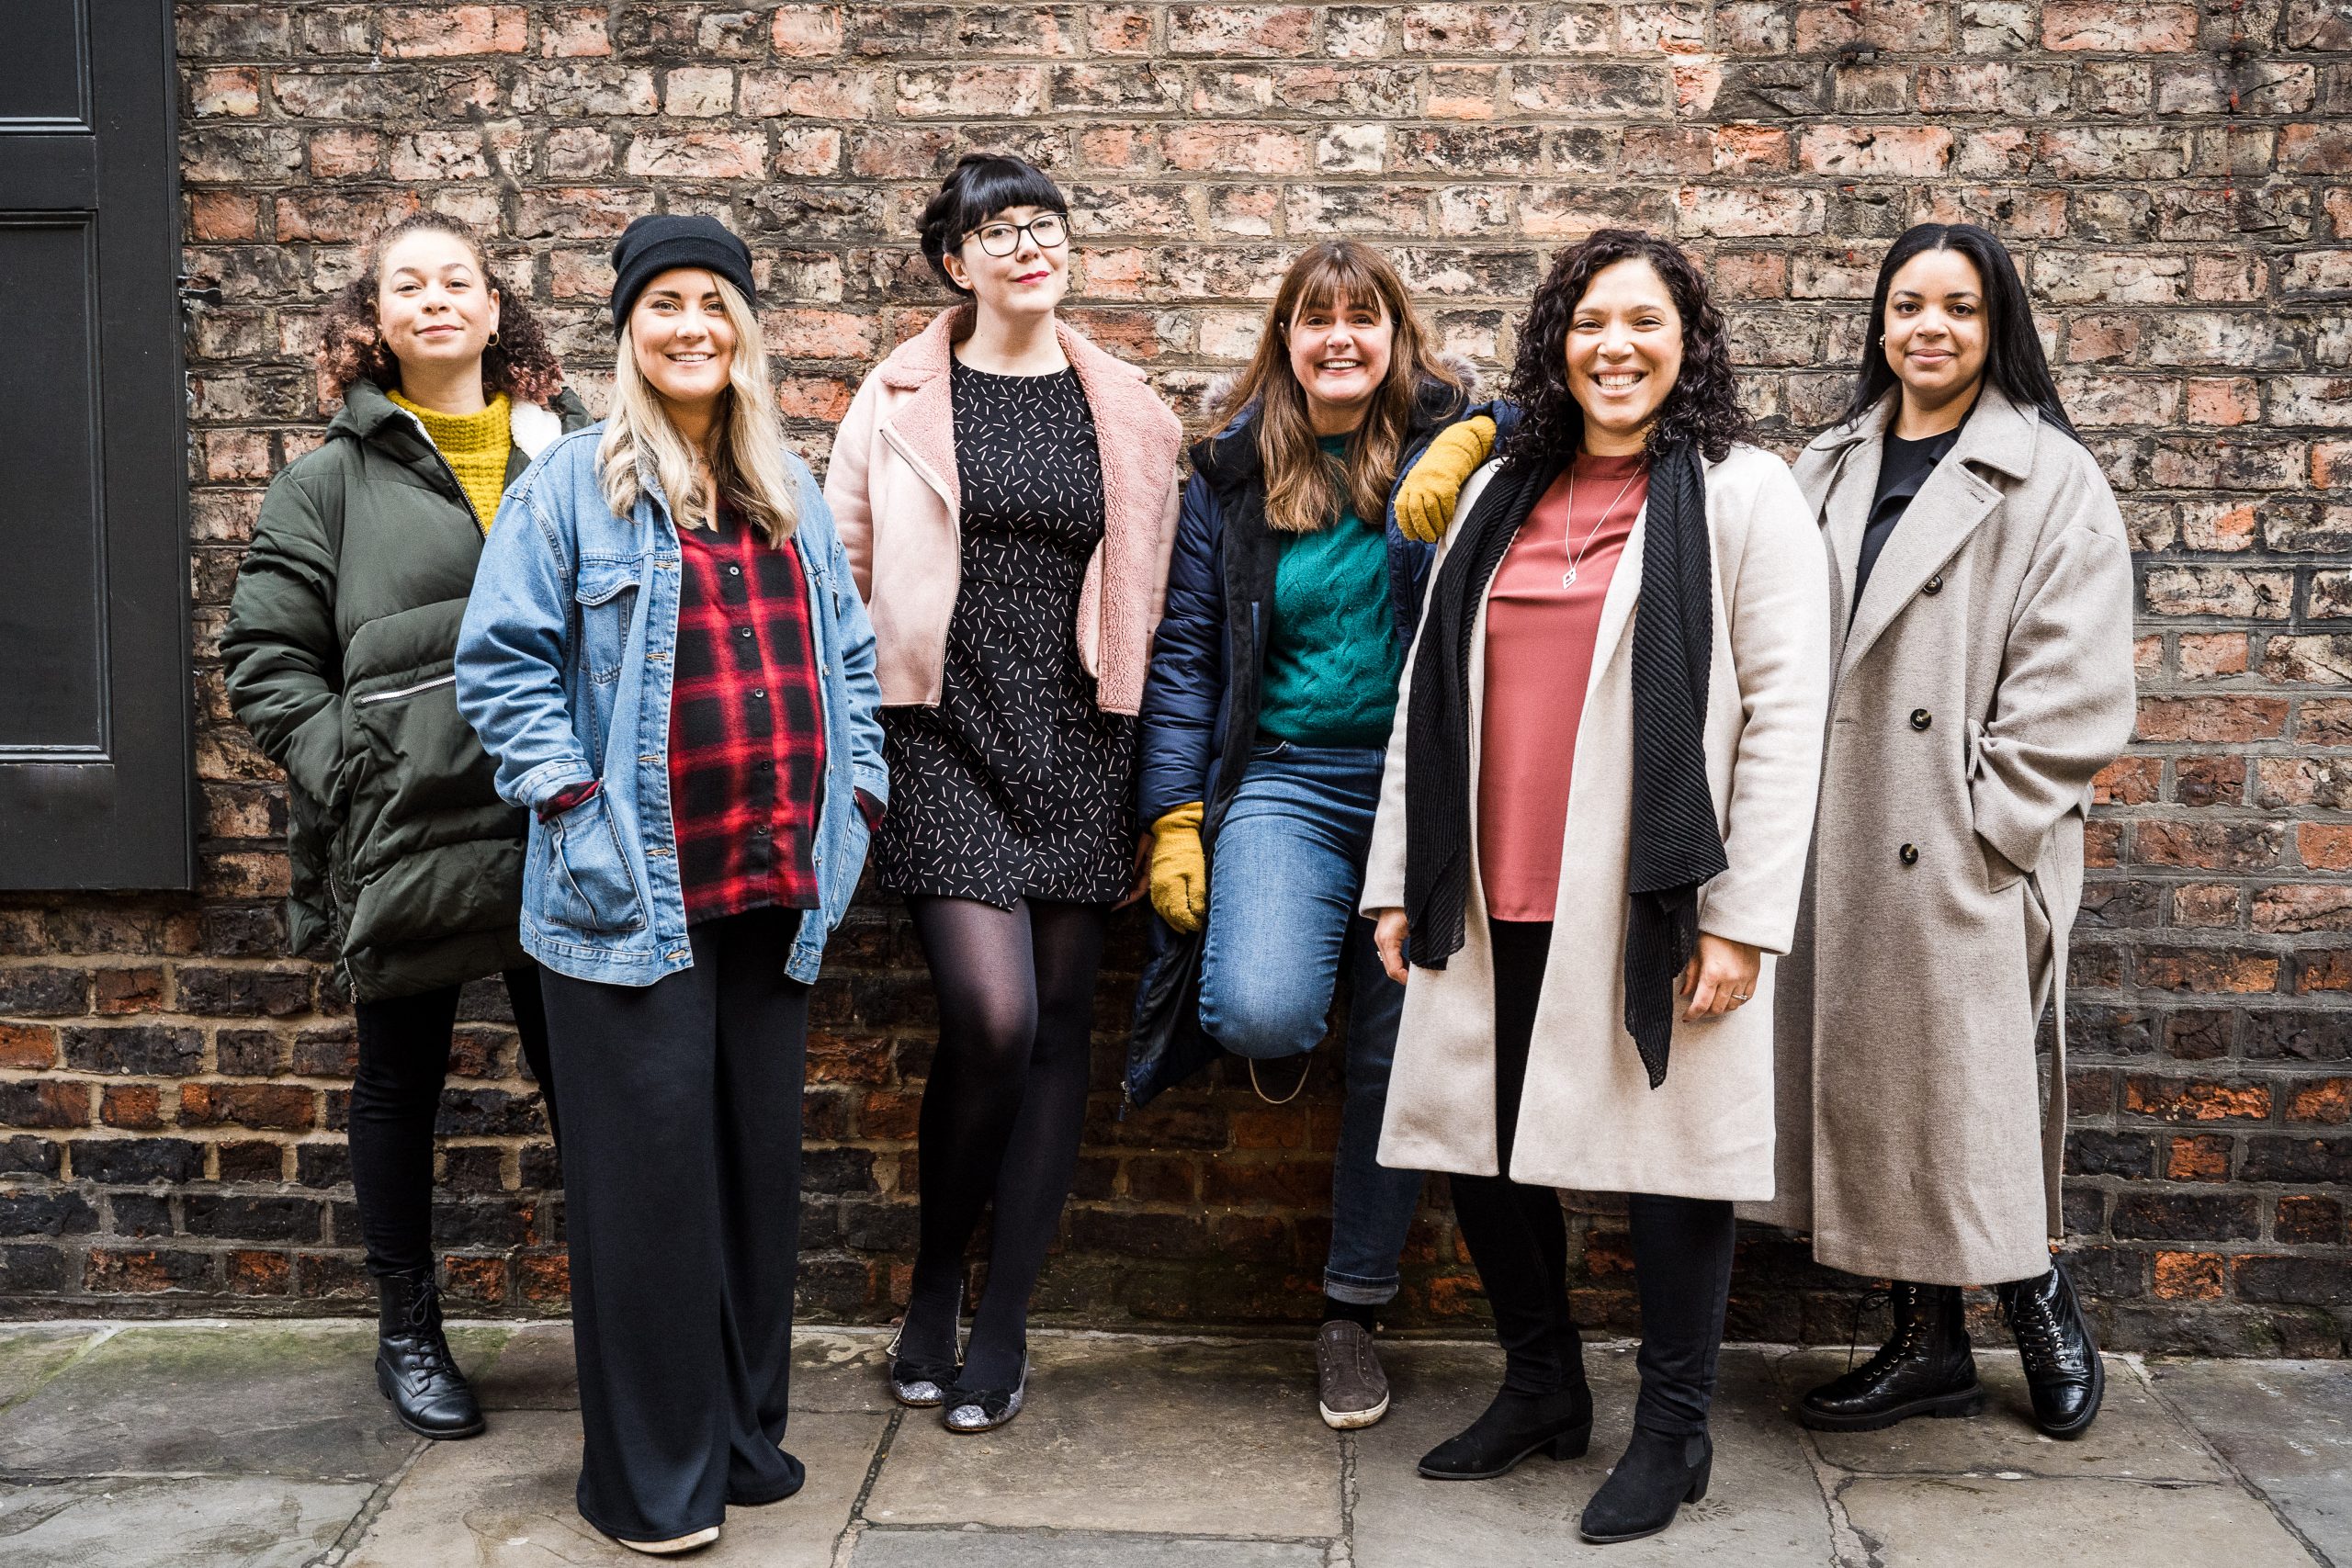 Alt text: The Pregnant Then Screwed team smiling together in front of a brick wall